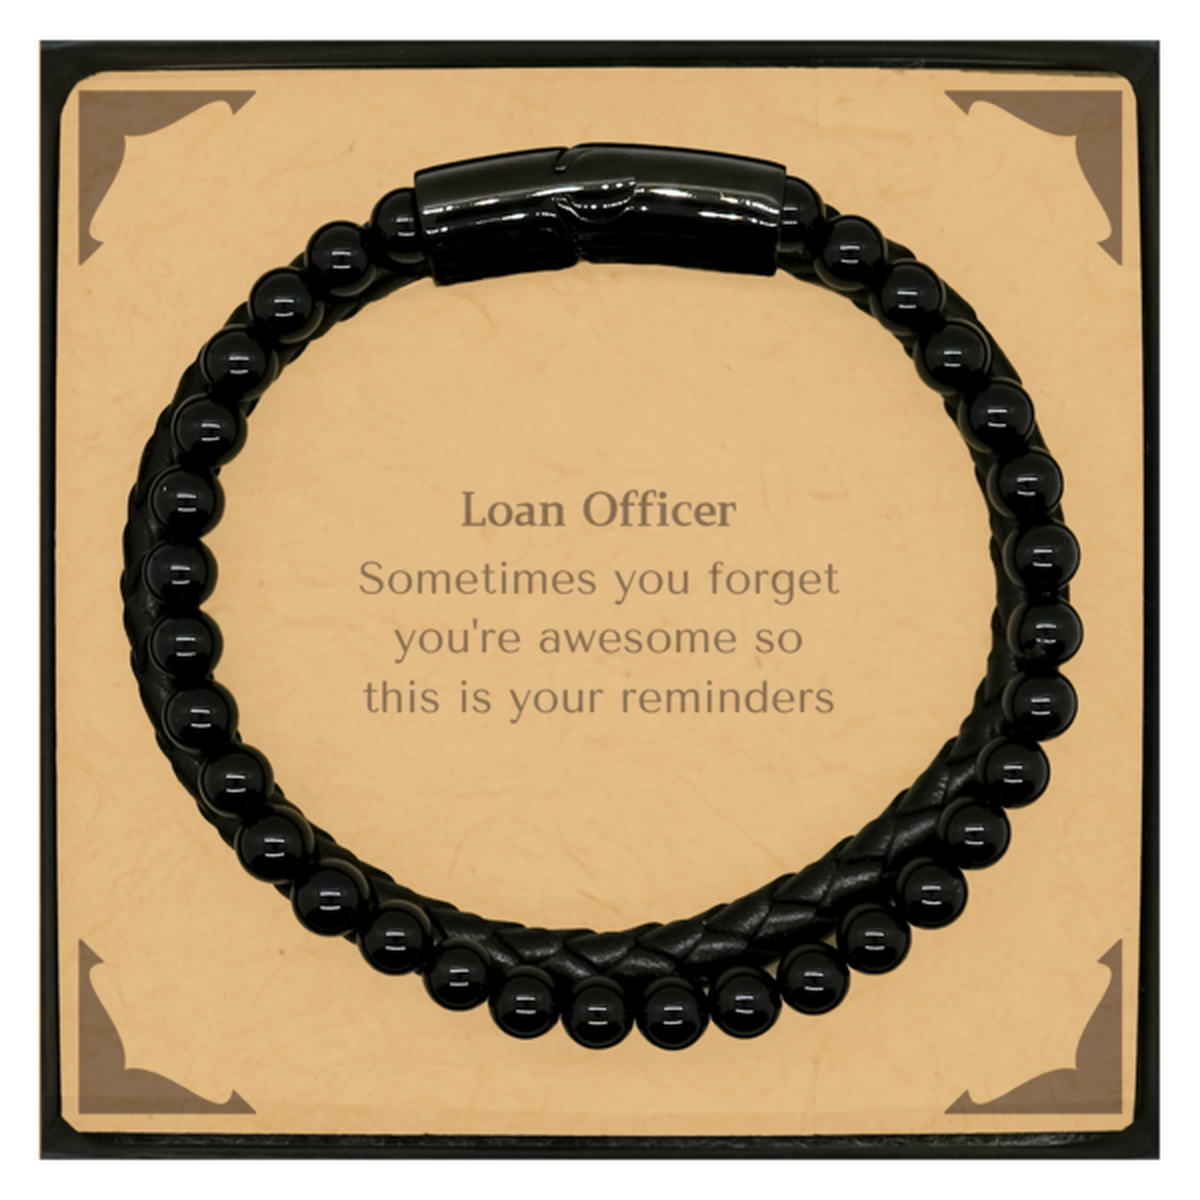 Sentimental Loan Officer Stone Leather Bracelets, Loan Officer Sometimes you forget you're awesome so this is your reminders, Graduation Christmas Birthday Gifts for Loan Officer, Men, Women, Coworkers